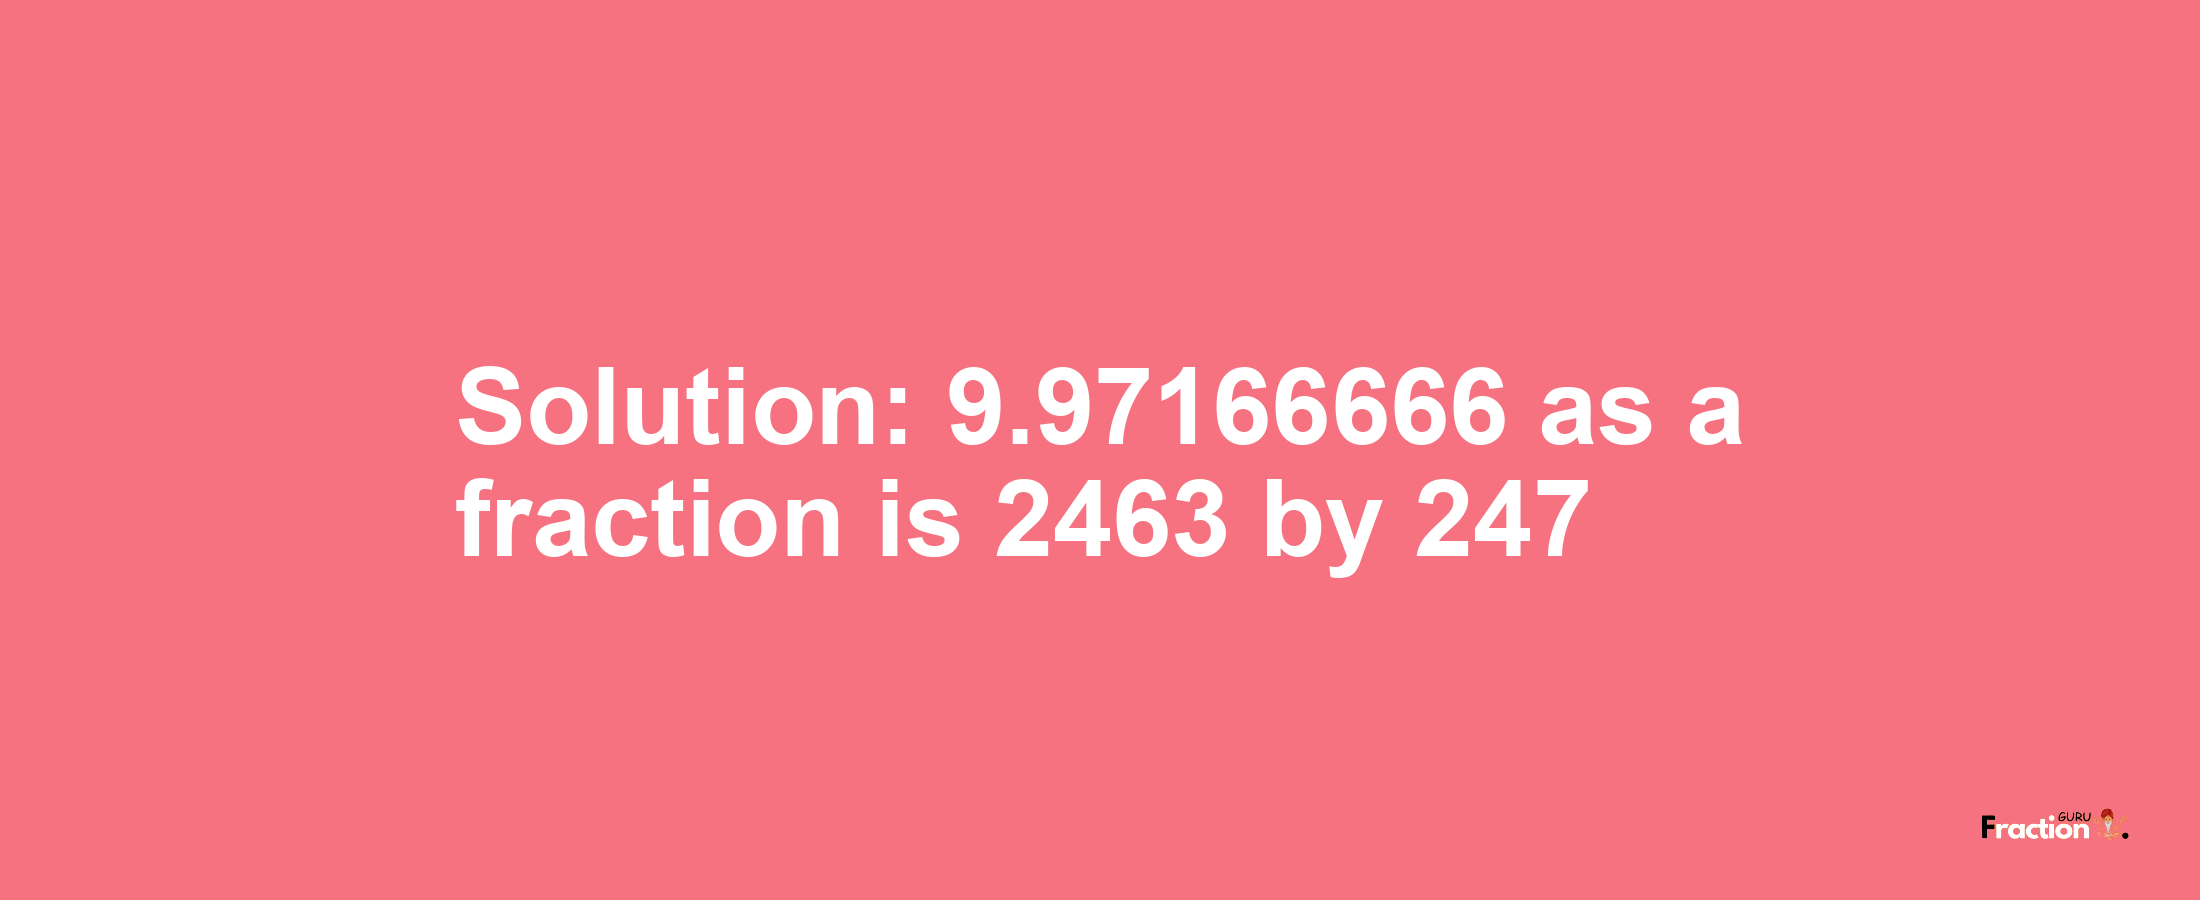 Solution:9.97166666 as a fraction is 2463/247